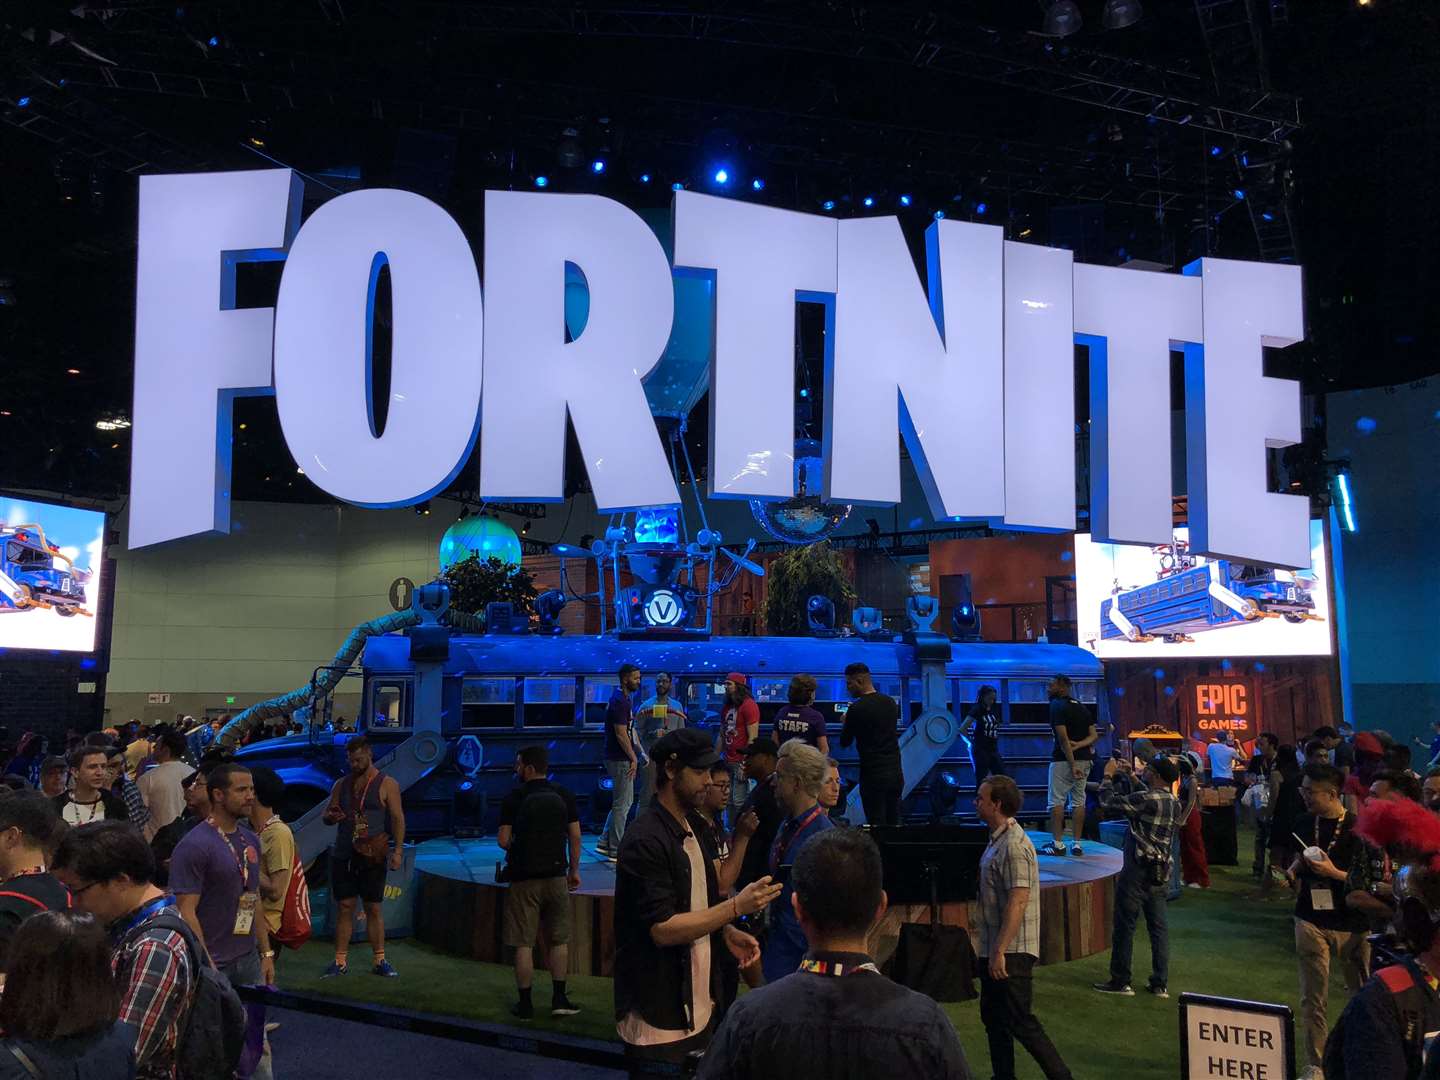 Epic Games is famed for developing the Fortnite game (Martyn Landi/PA)